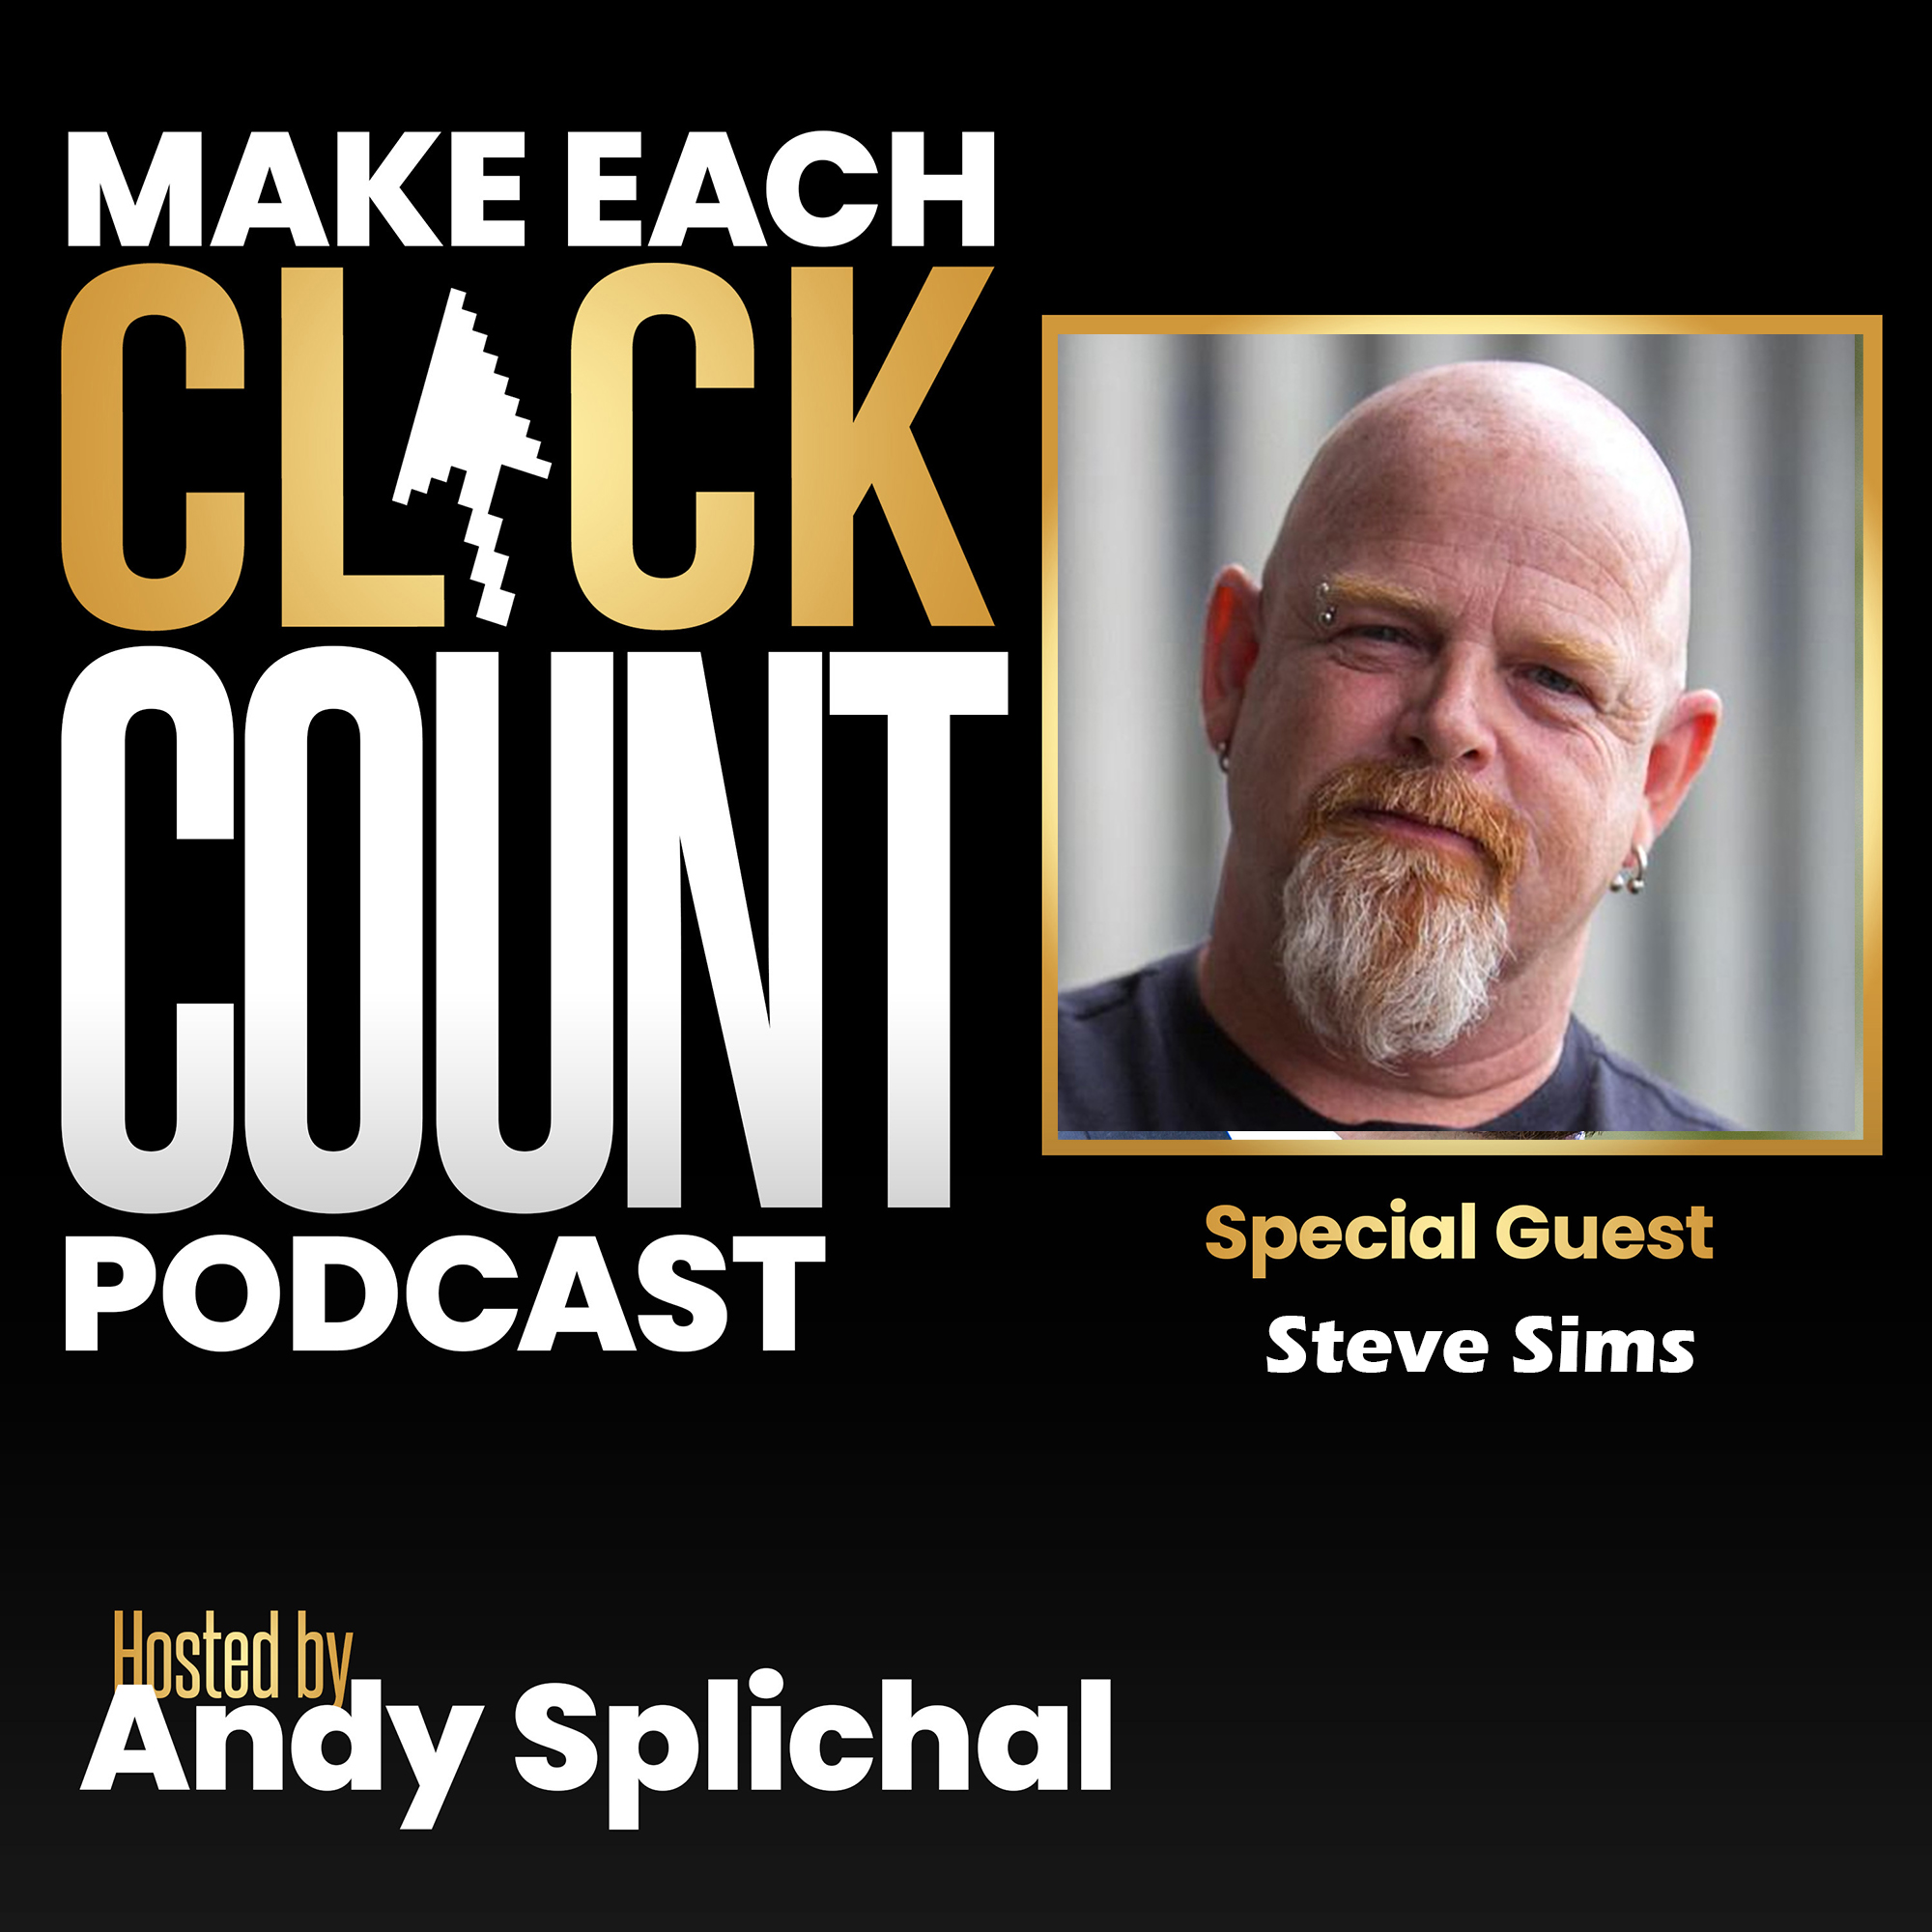 Best of Make Each Click Count Podcast With Steve Sims Image